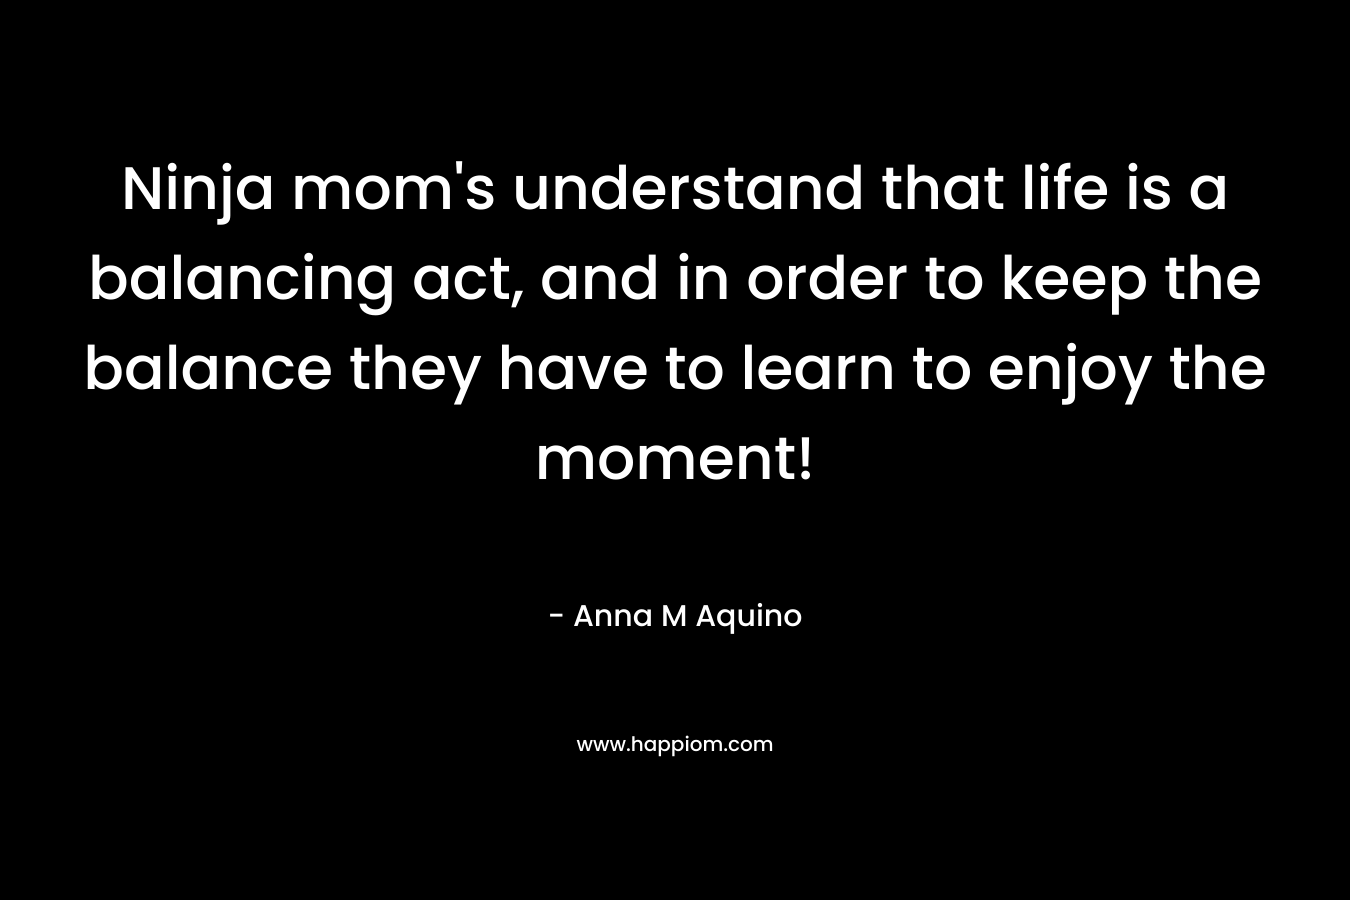 Ninja mom’s understand that life is a balancing act, and in order to keep the balance they have to learn to enjoy the moment! – Anna M Aquino